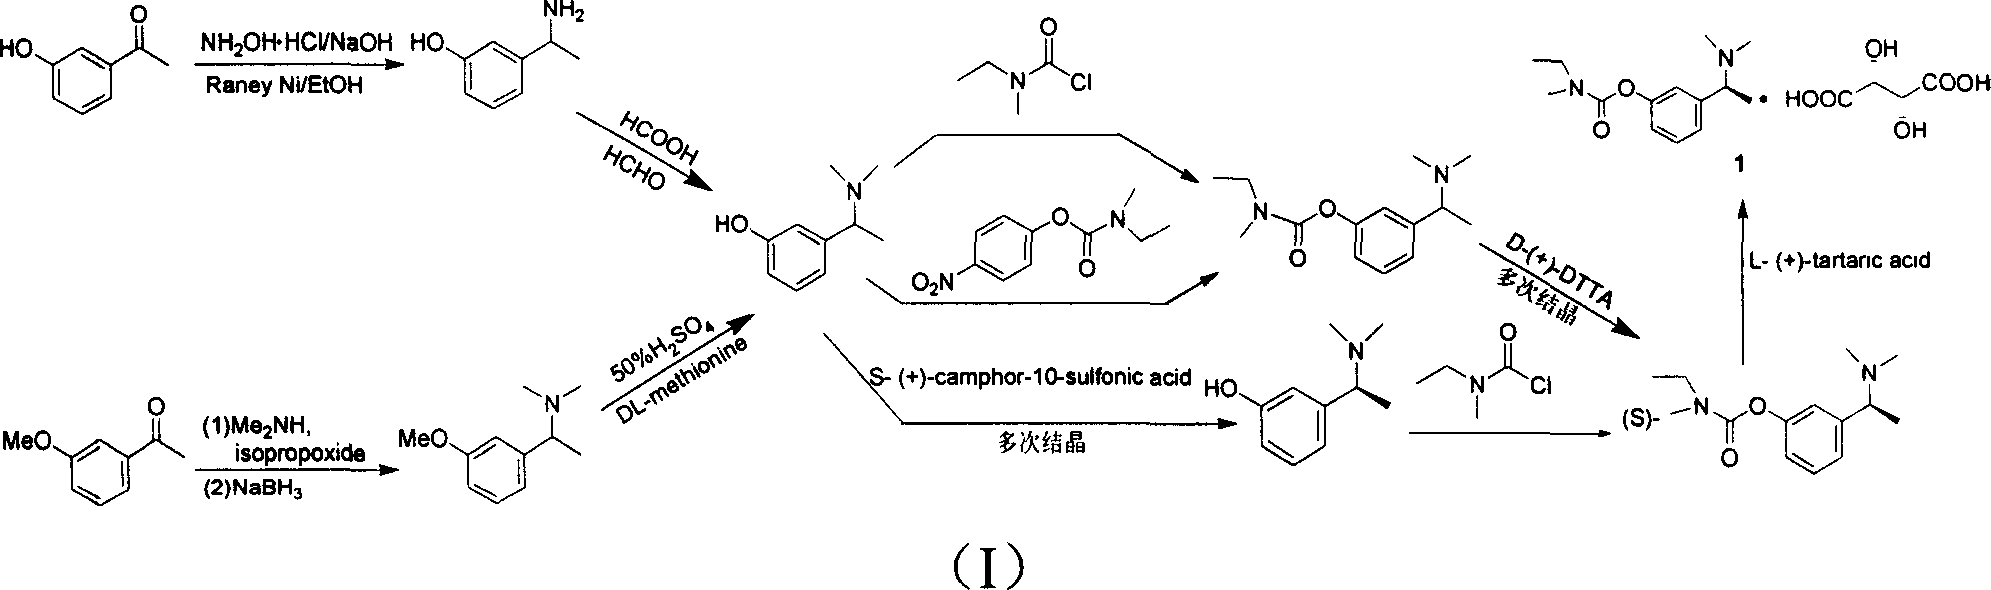 Method for synthesis of rivastigmine